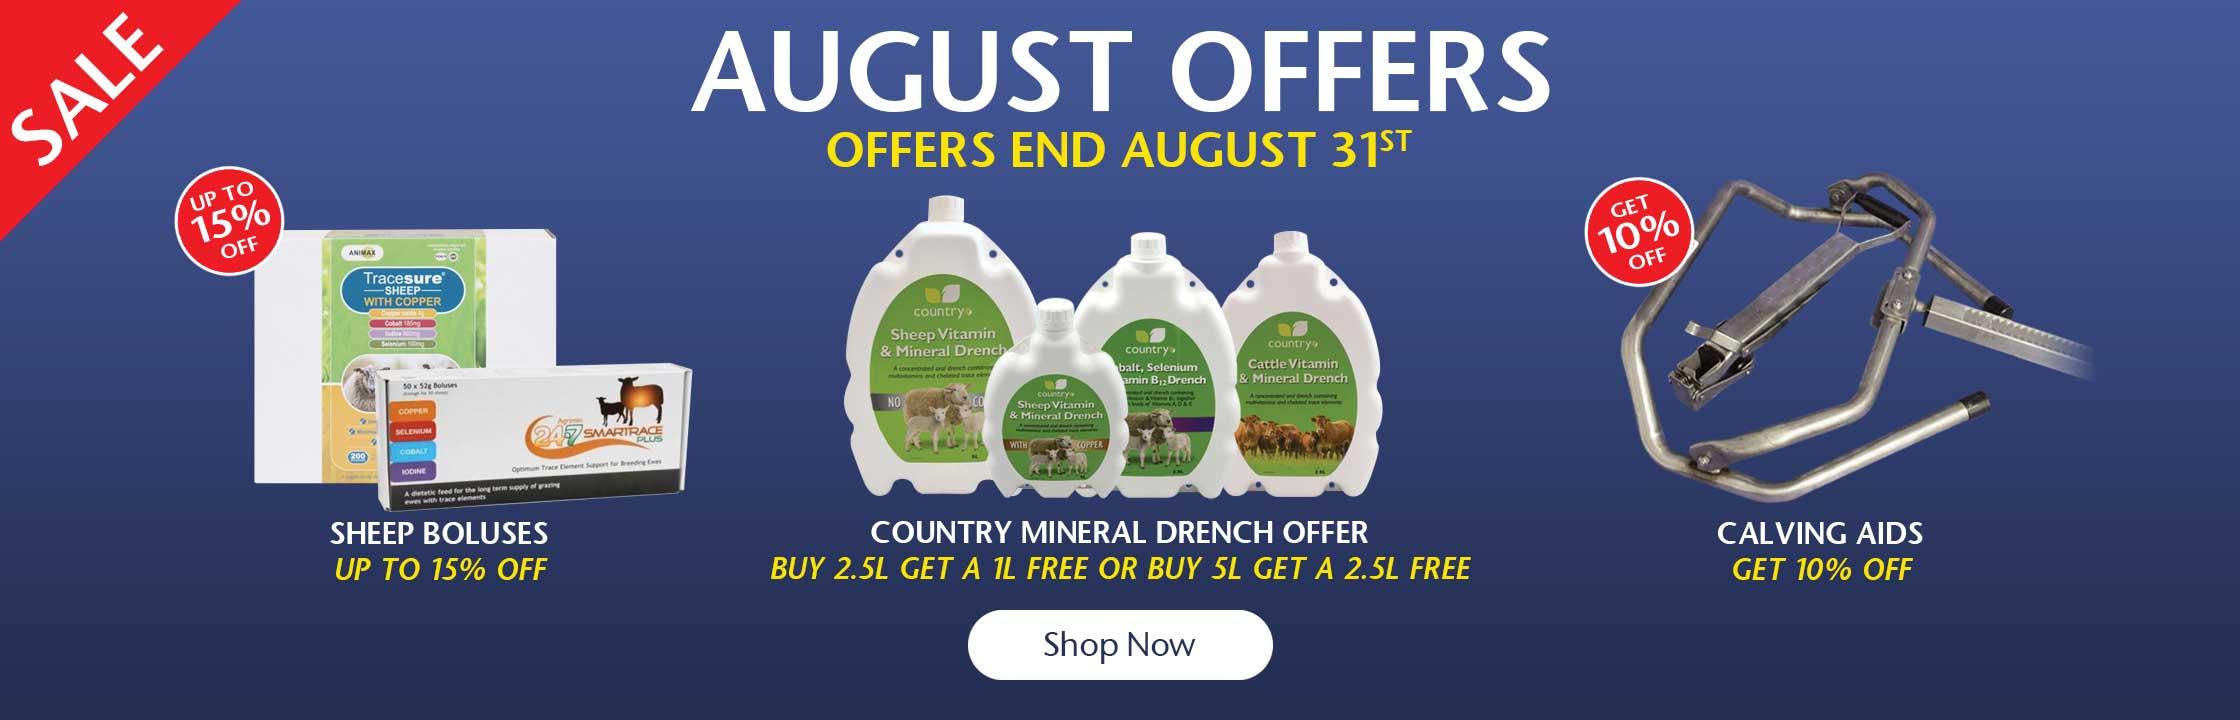 August Offers